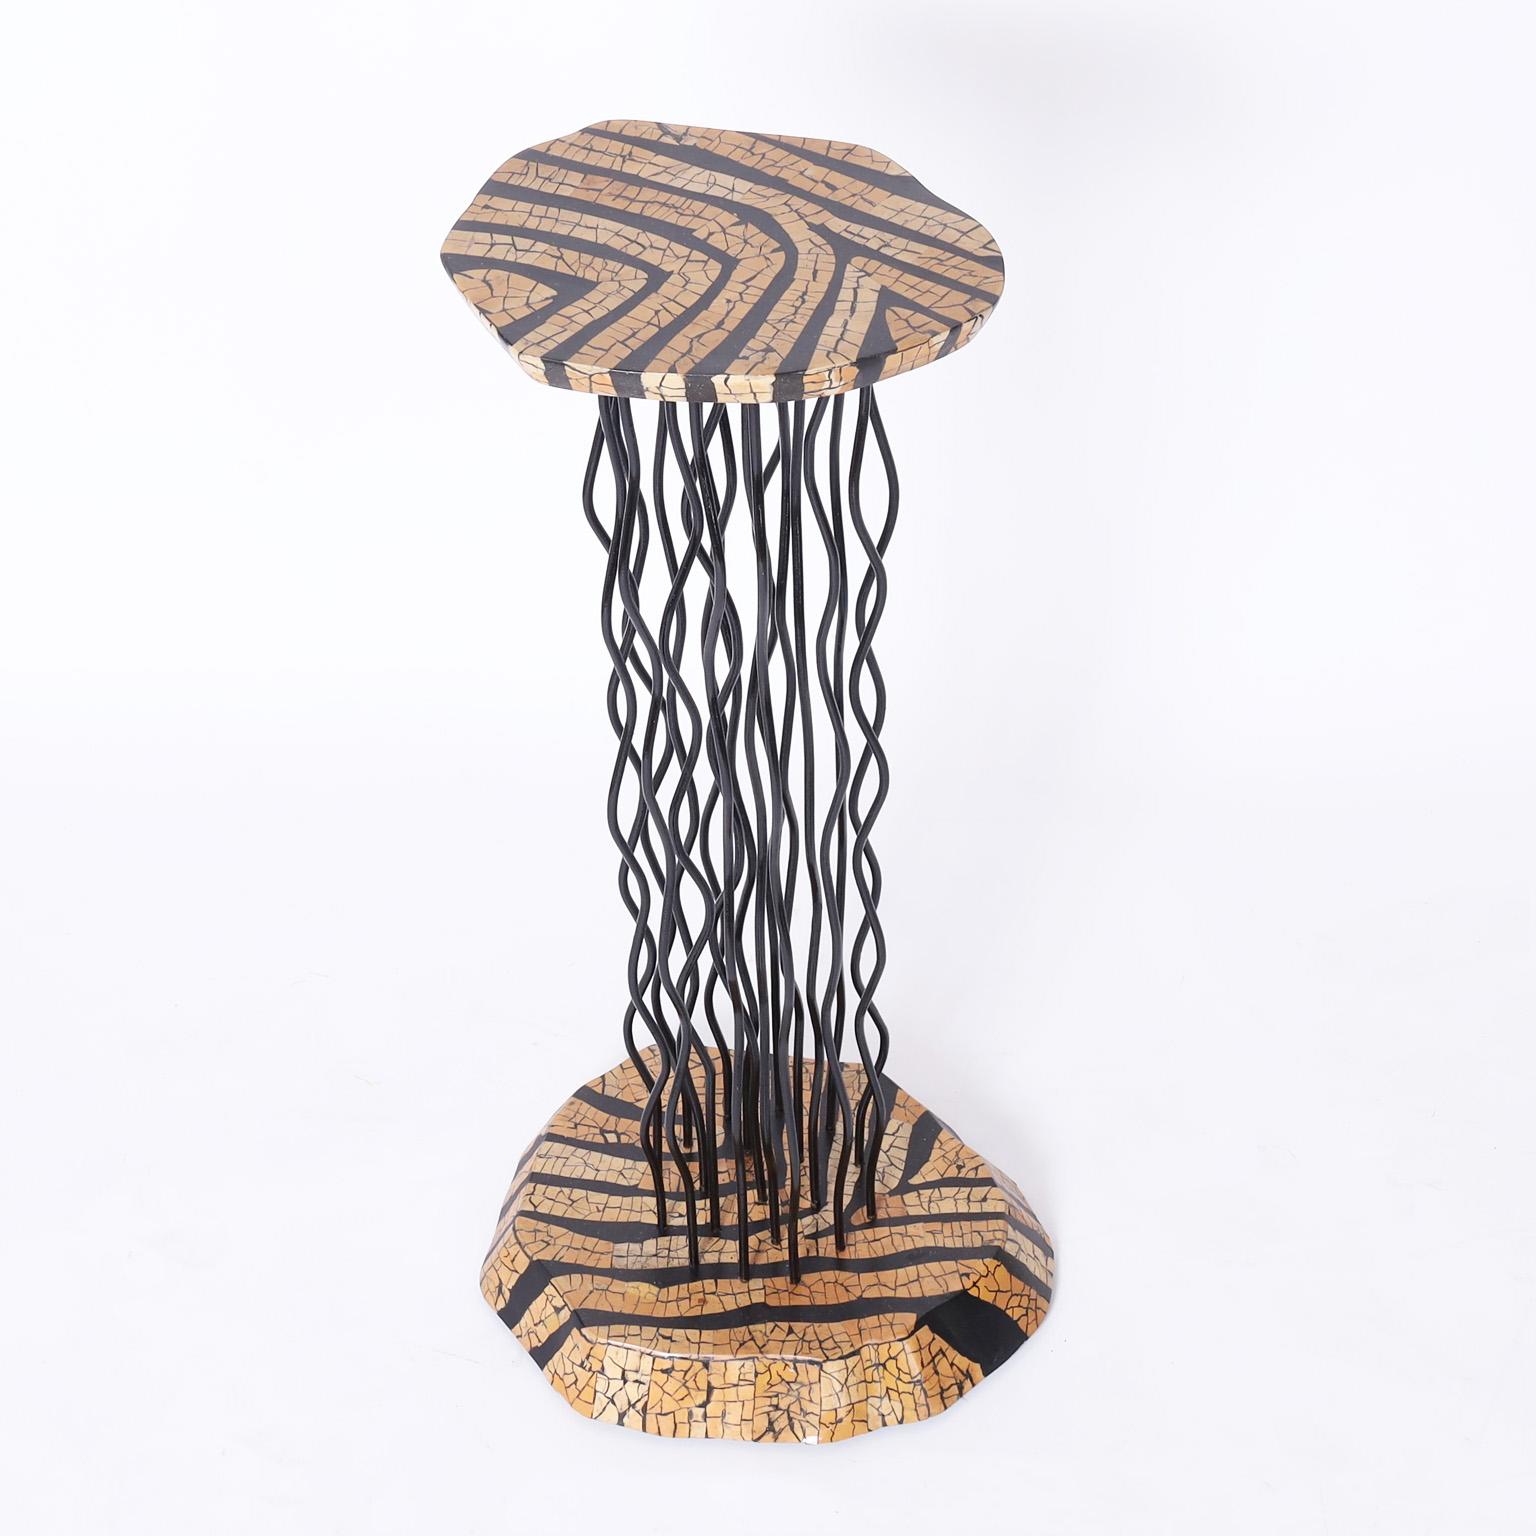 Standout modernist pedestal crafted with a coconut shell mosaic on the top and base having sculptural iron supports designed in a postmodern composition.